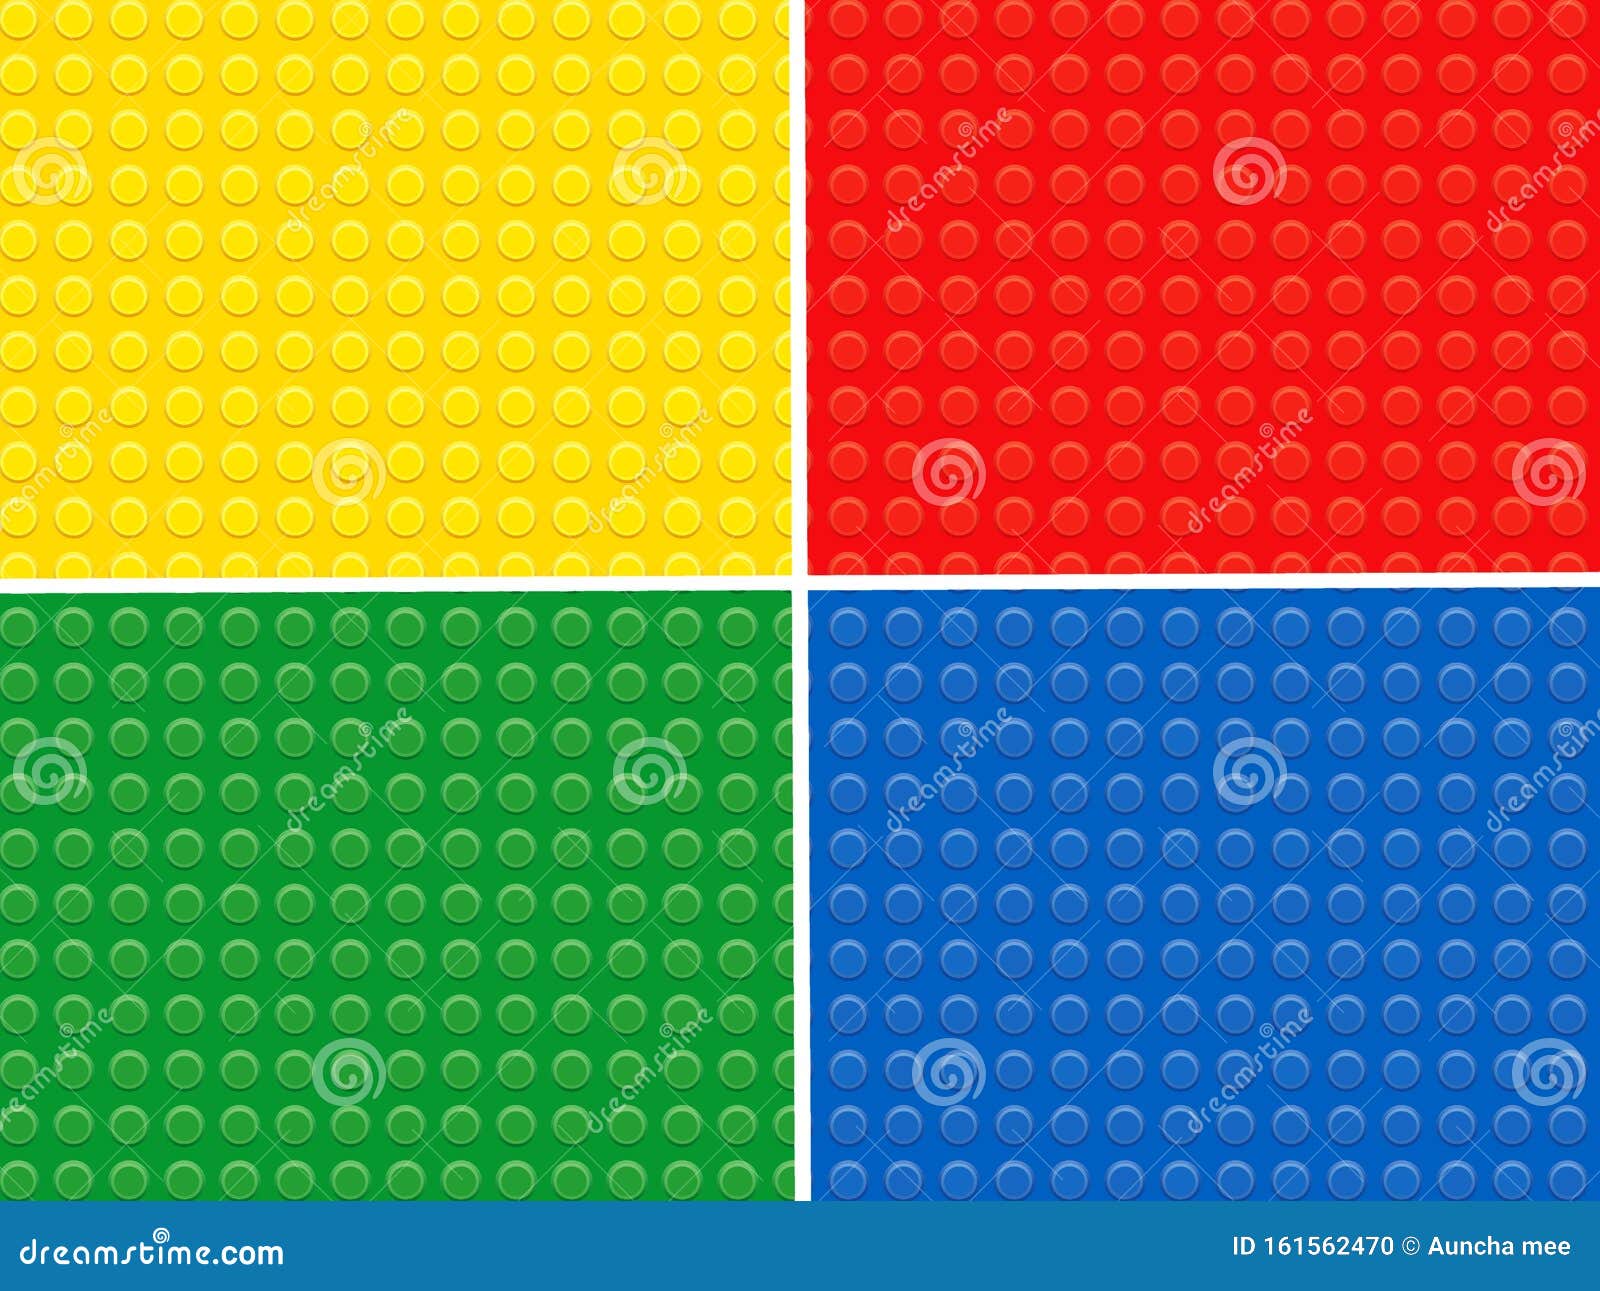 Featured image of post Background Lego Pattern - Lego bricks pattern in red, orange, yellow, green and blue colors, colorful looking background, seamless blocks graphic.